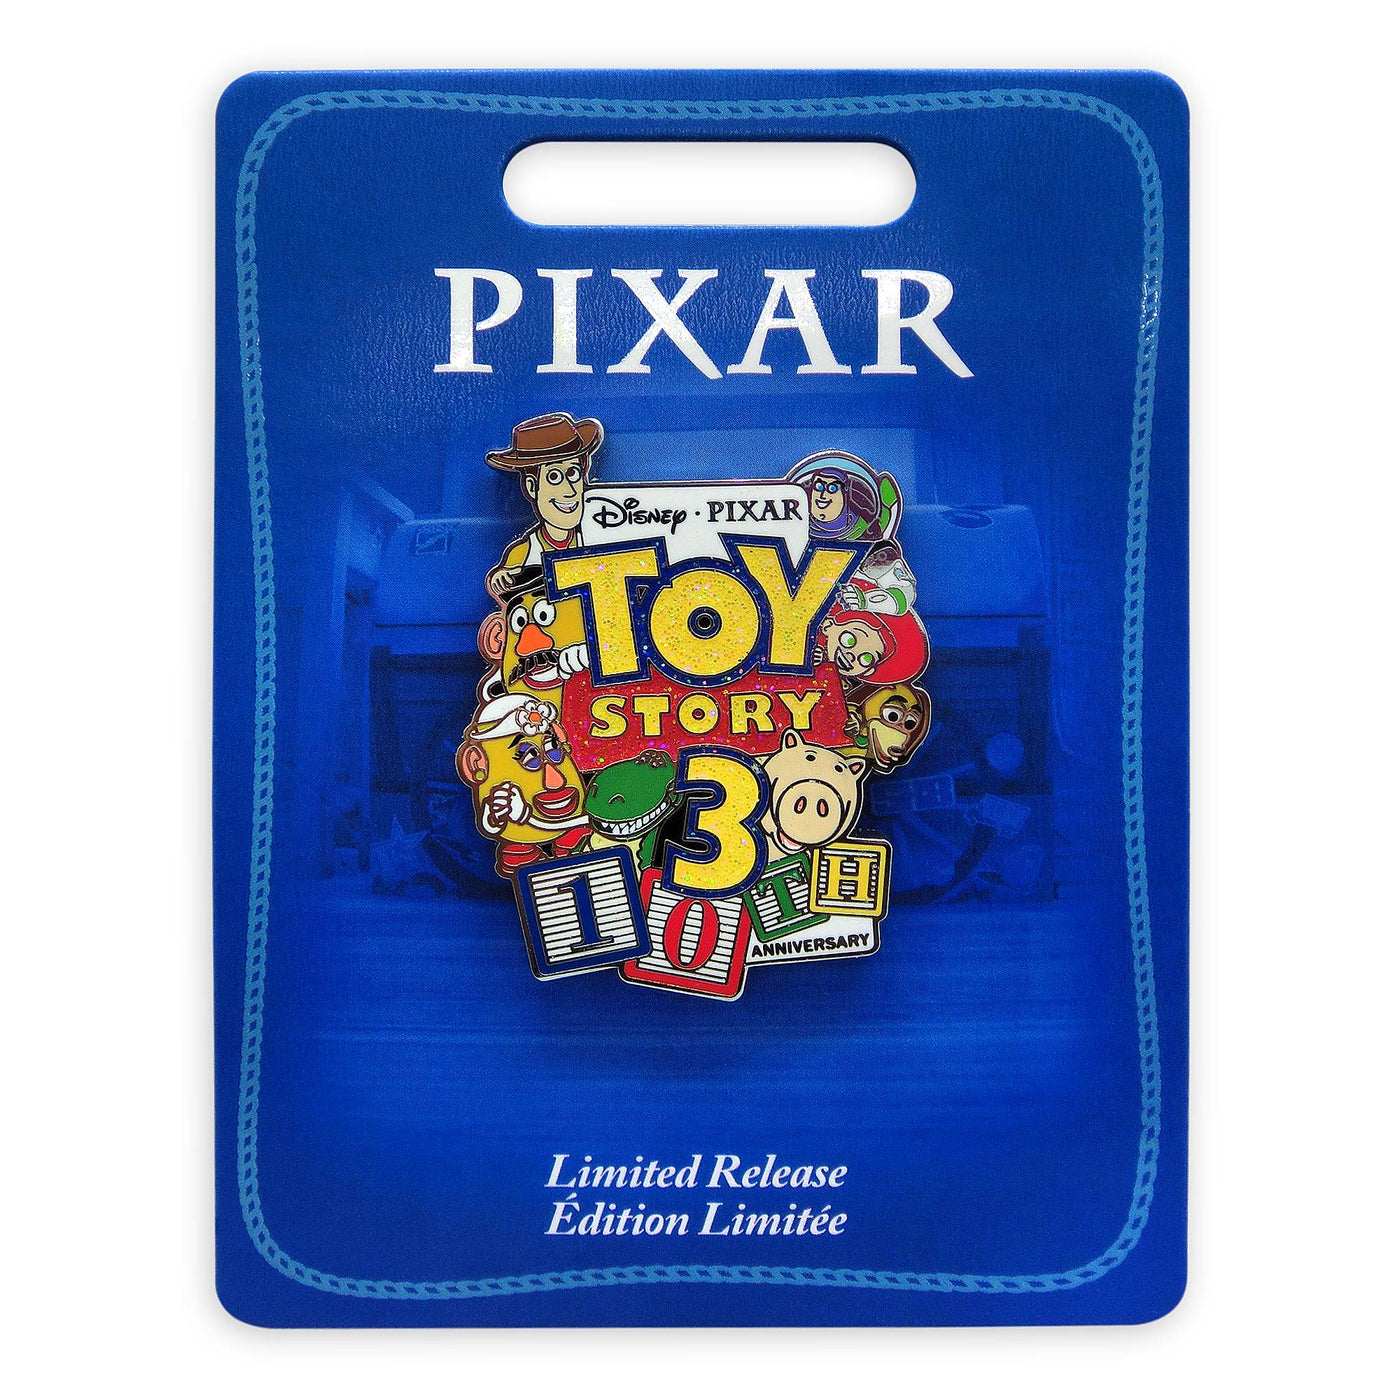 Disney Parks Toy Story 3 Pin 10th Anniversary Limited Release New with Card